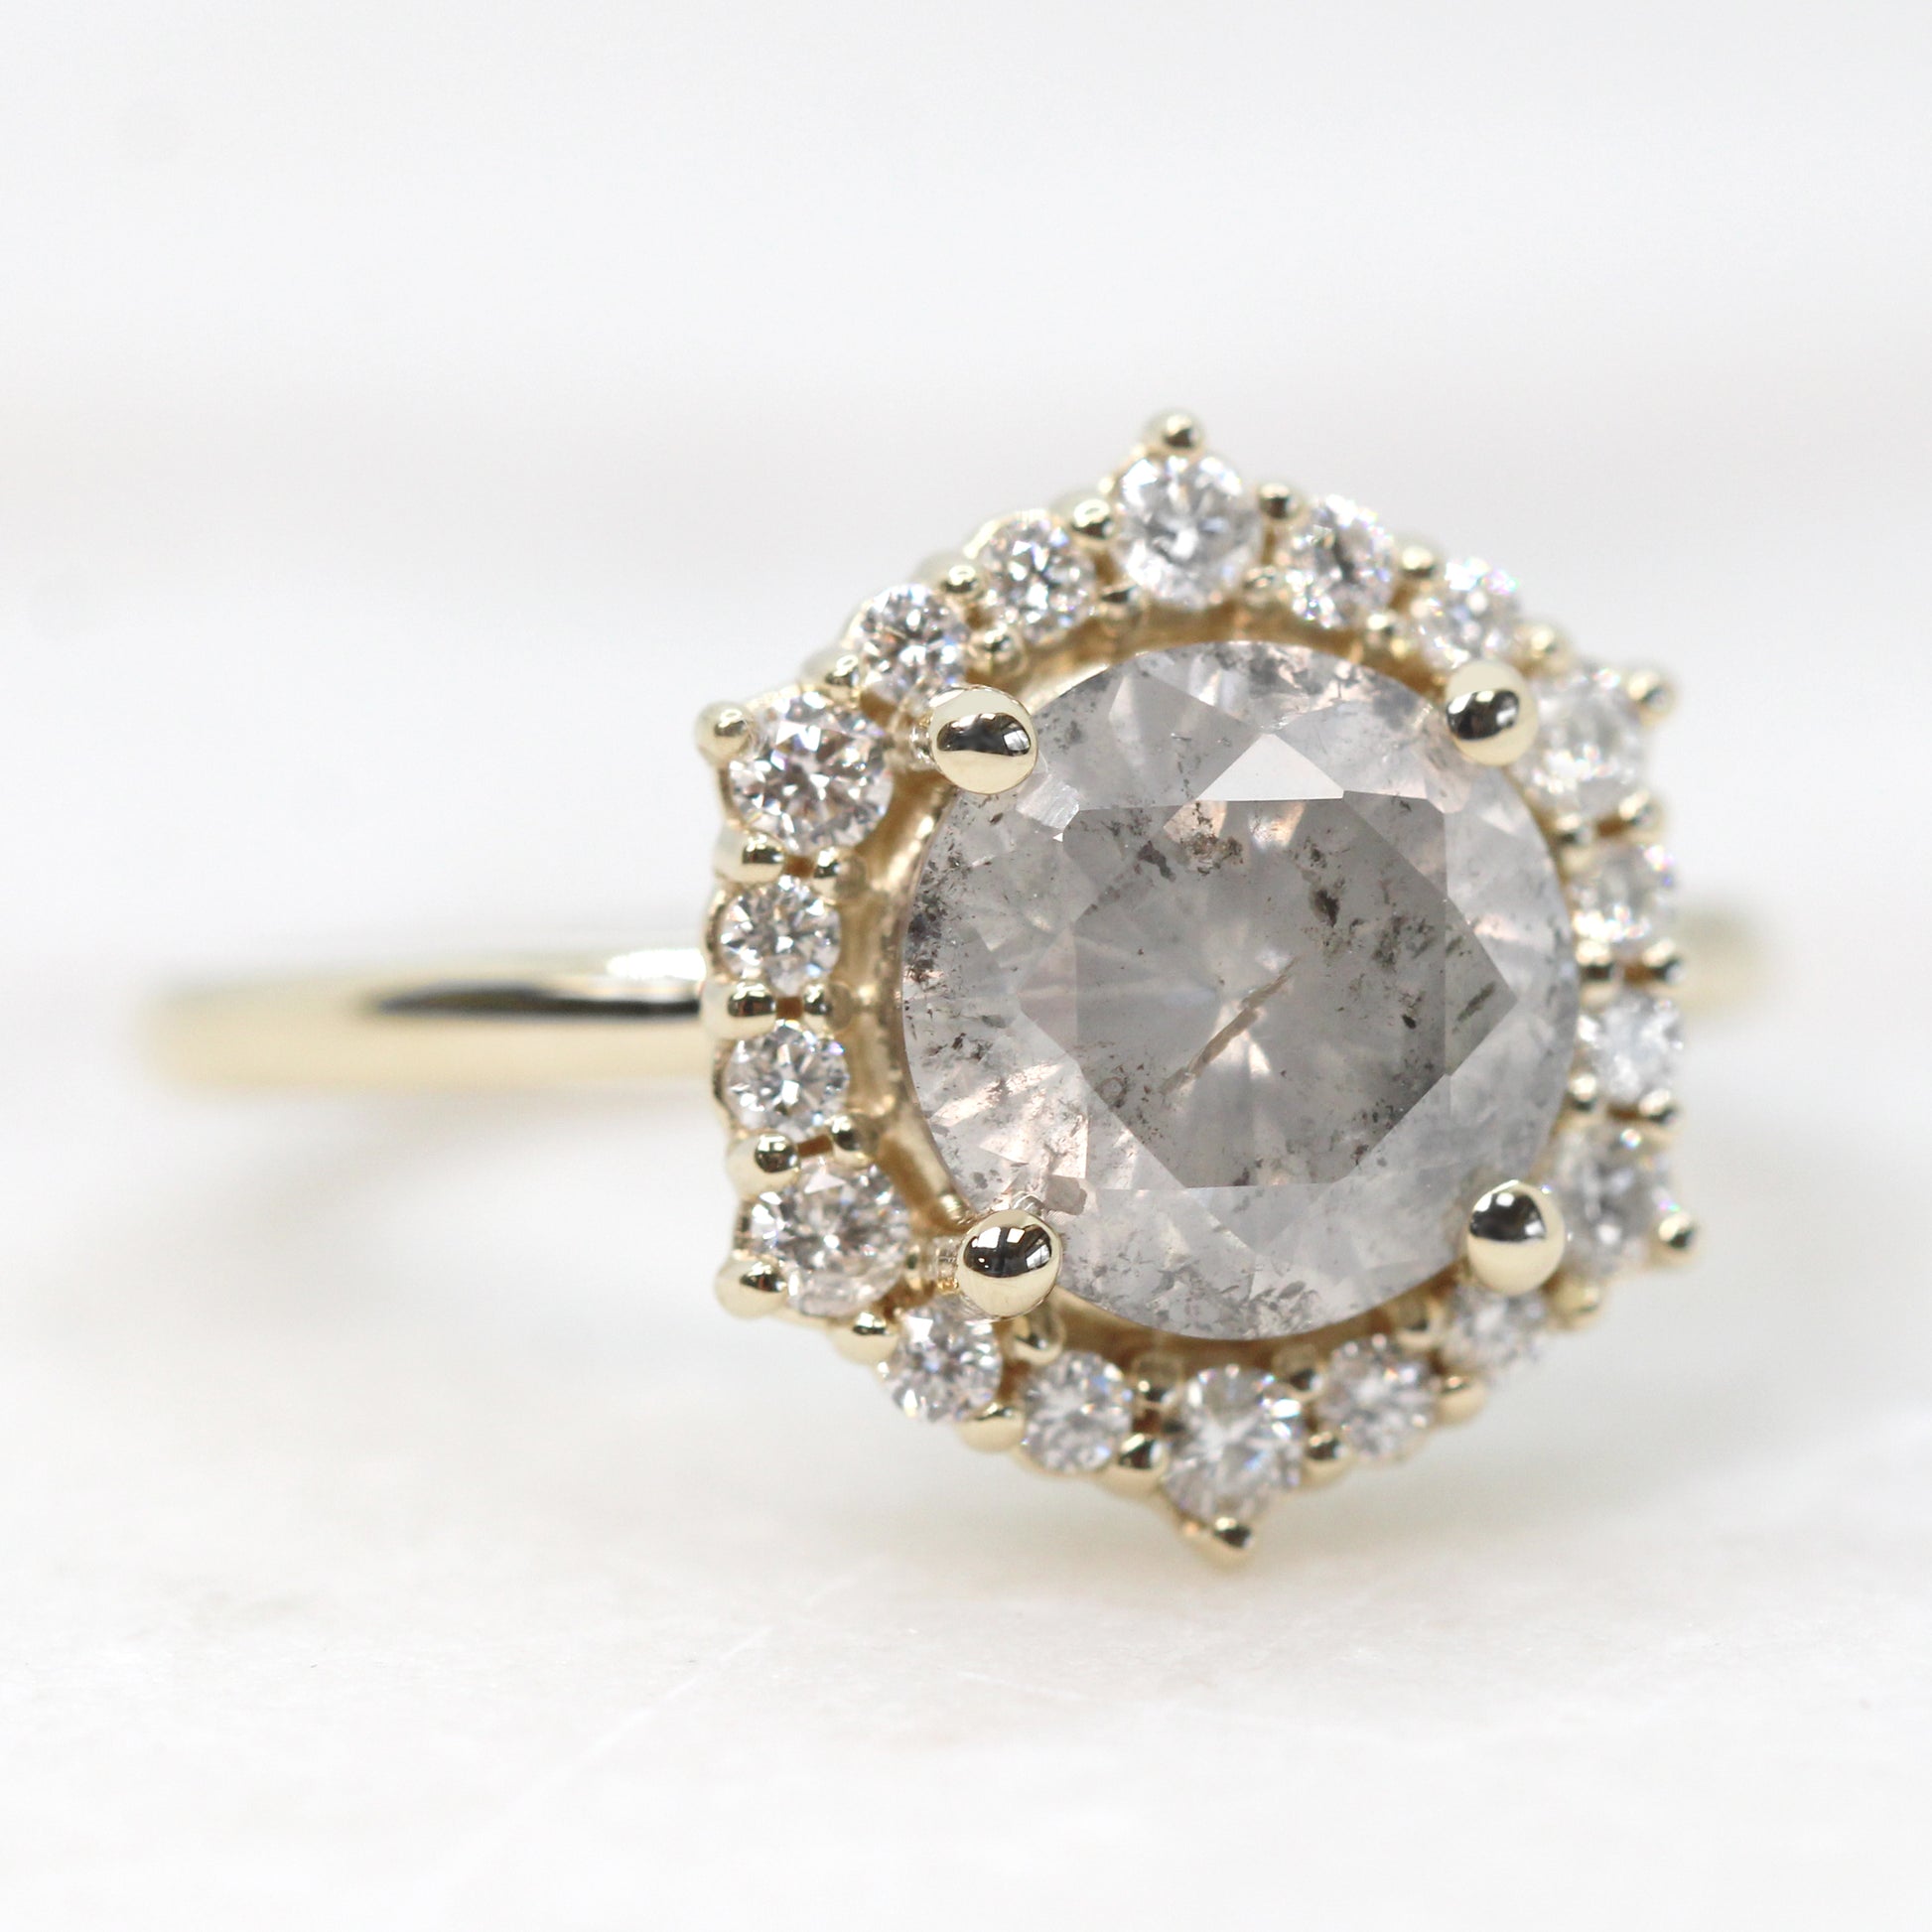 Stella Ring with a 2.44 Carat Round Light Gray Celestial Diamond and White Accent Diamonds in 14k Yellow Gold - Ready to Size and Ship - Midwinter Co. Alternative Bridal Rings and Modern Fine Jewelry